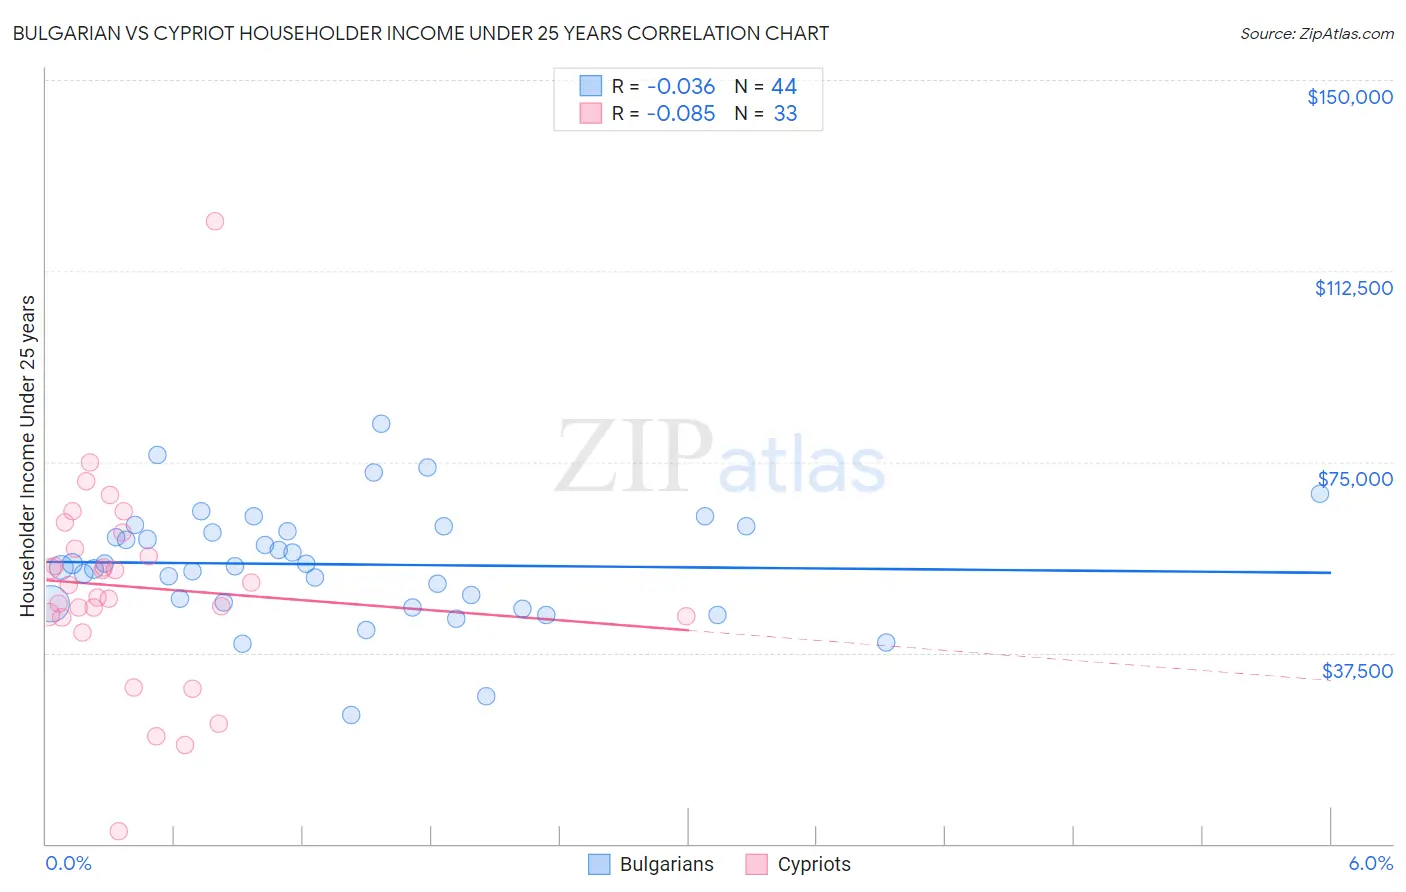 Bulgarian vs Cypriot Householder Income Under 25 years